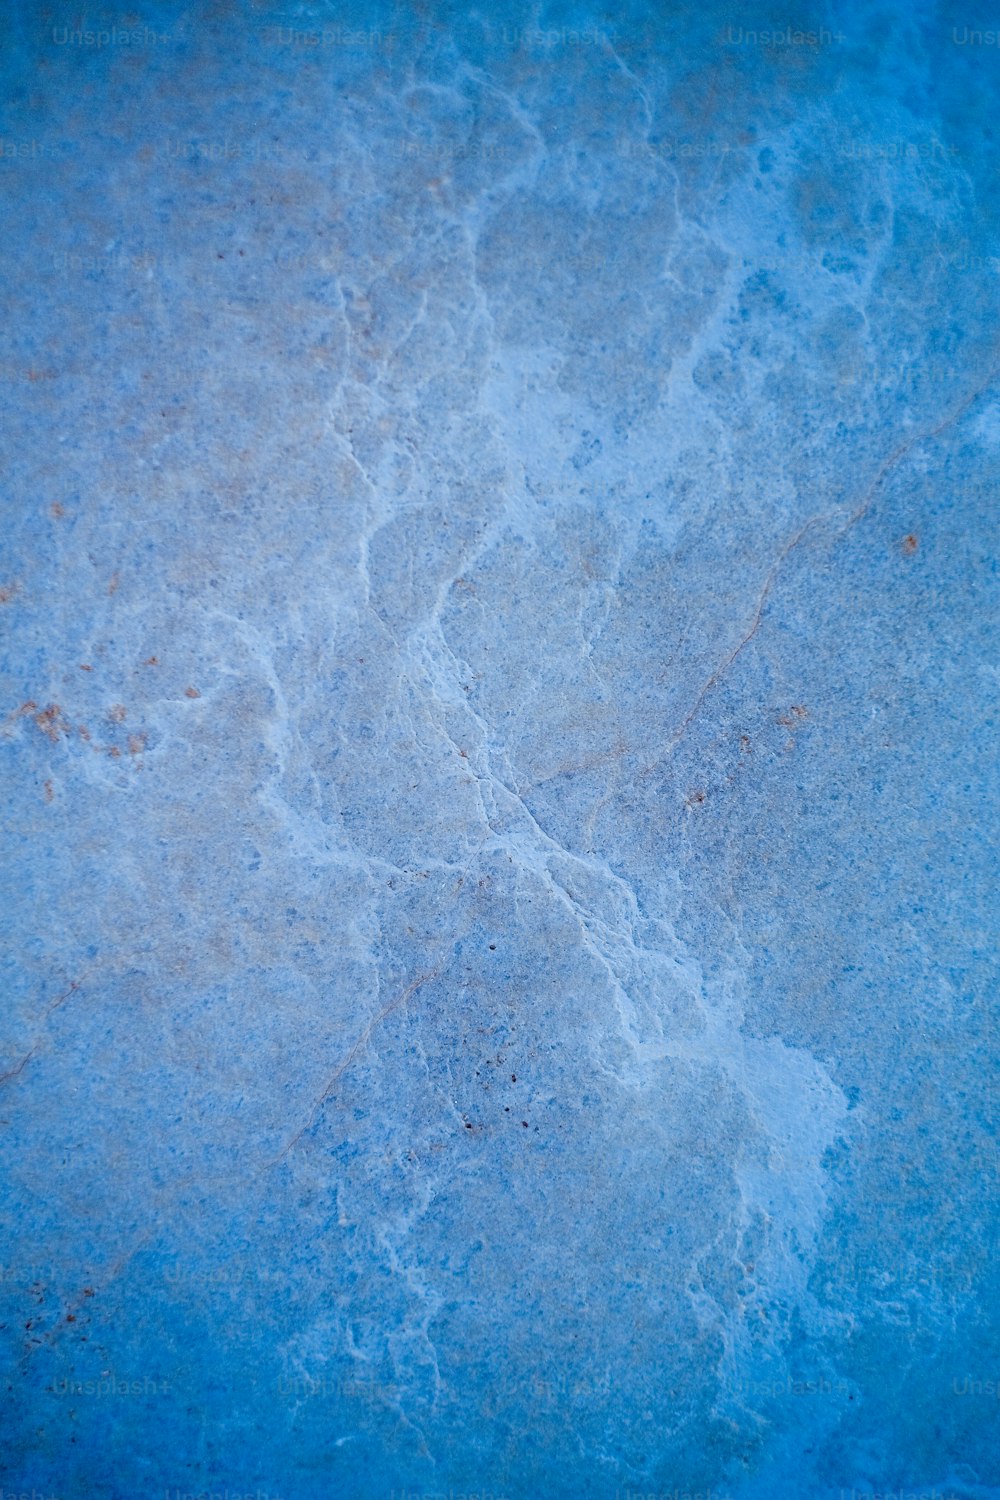 a close up of a blue surface with water